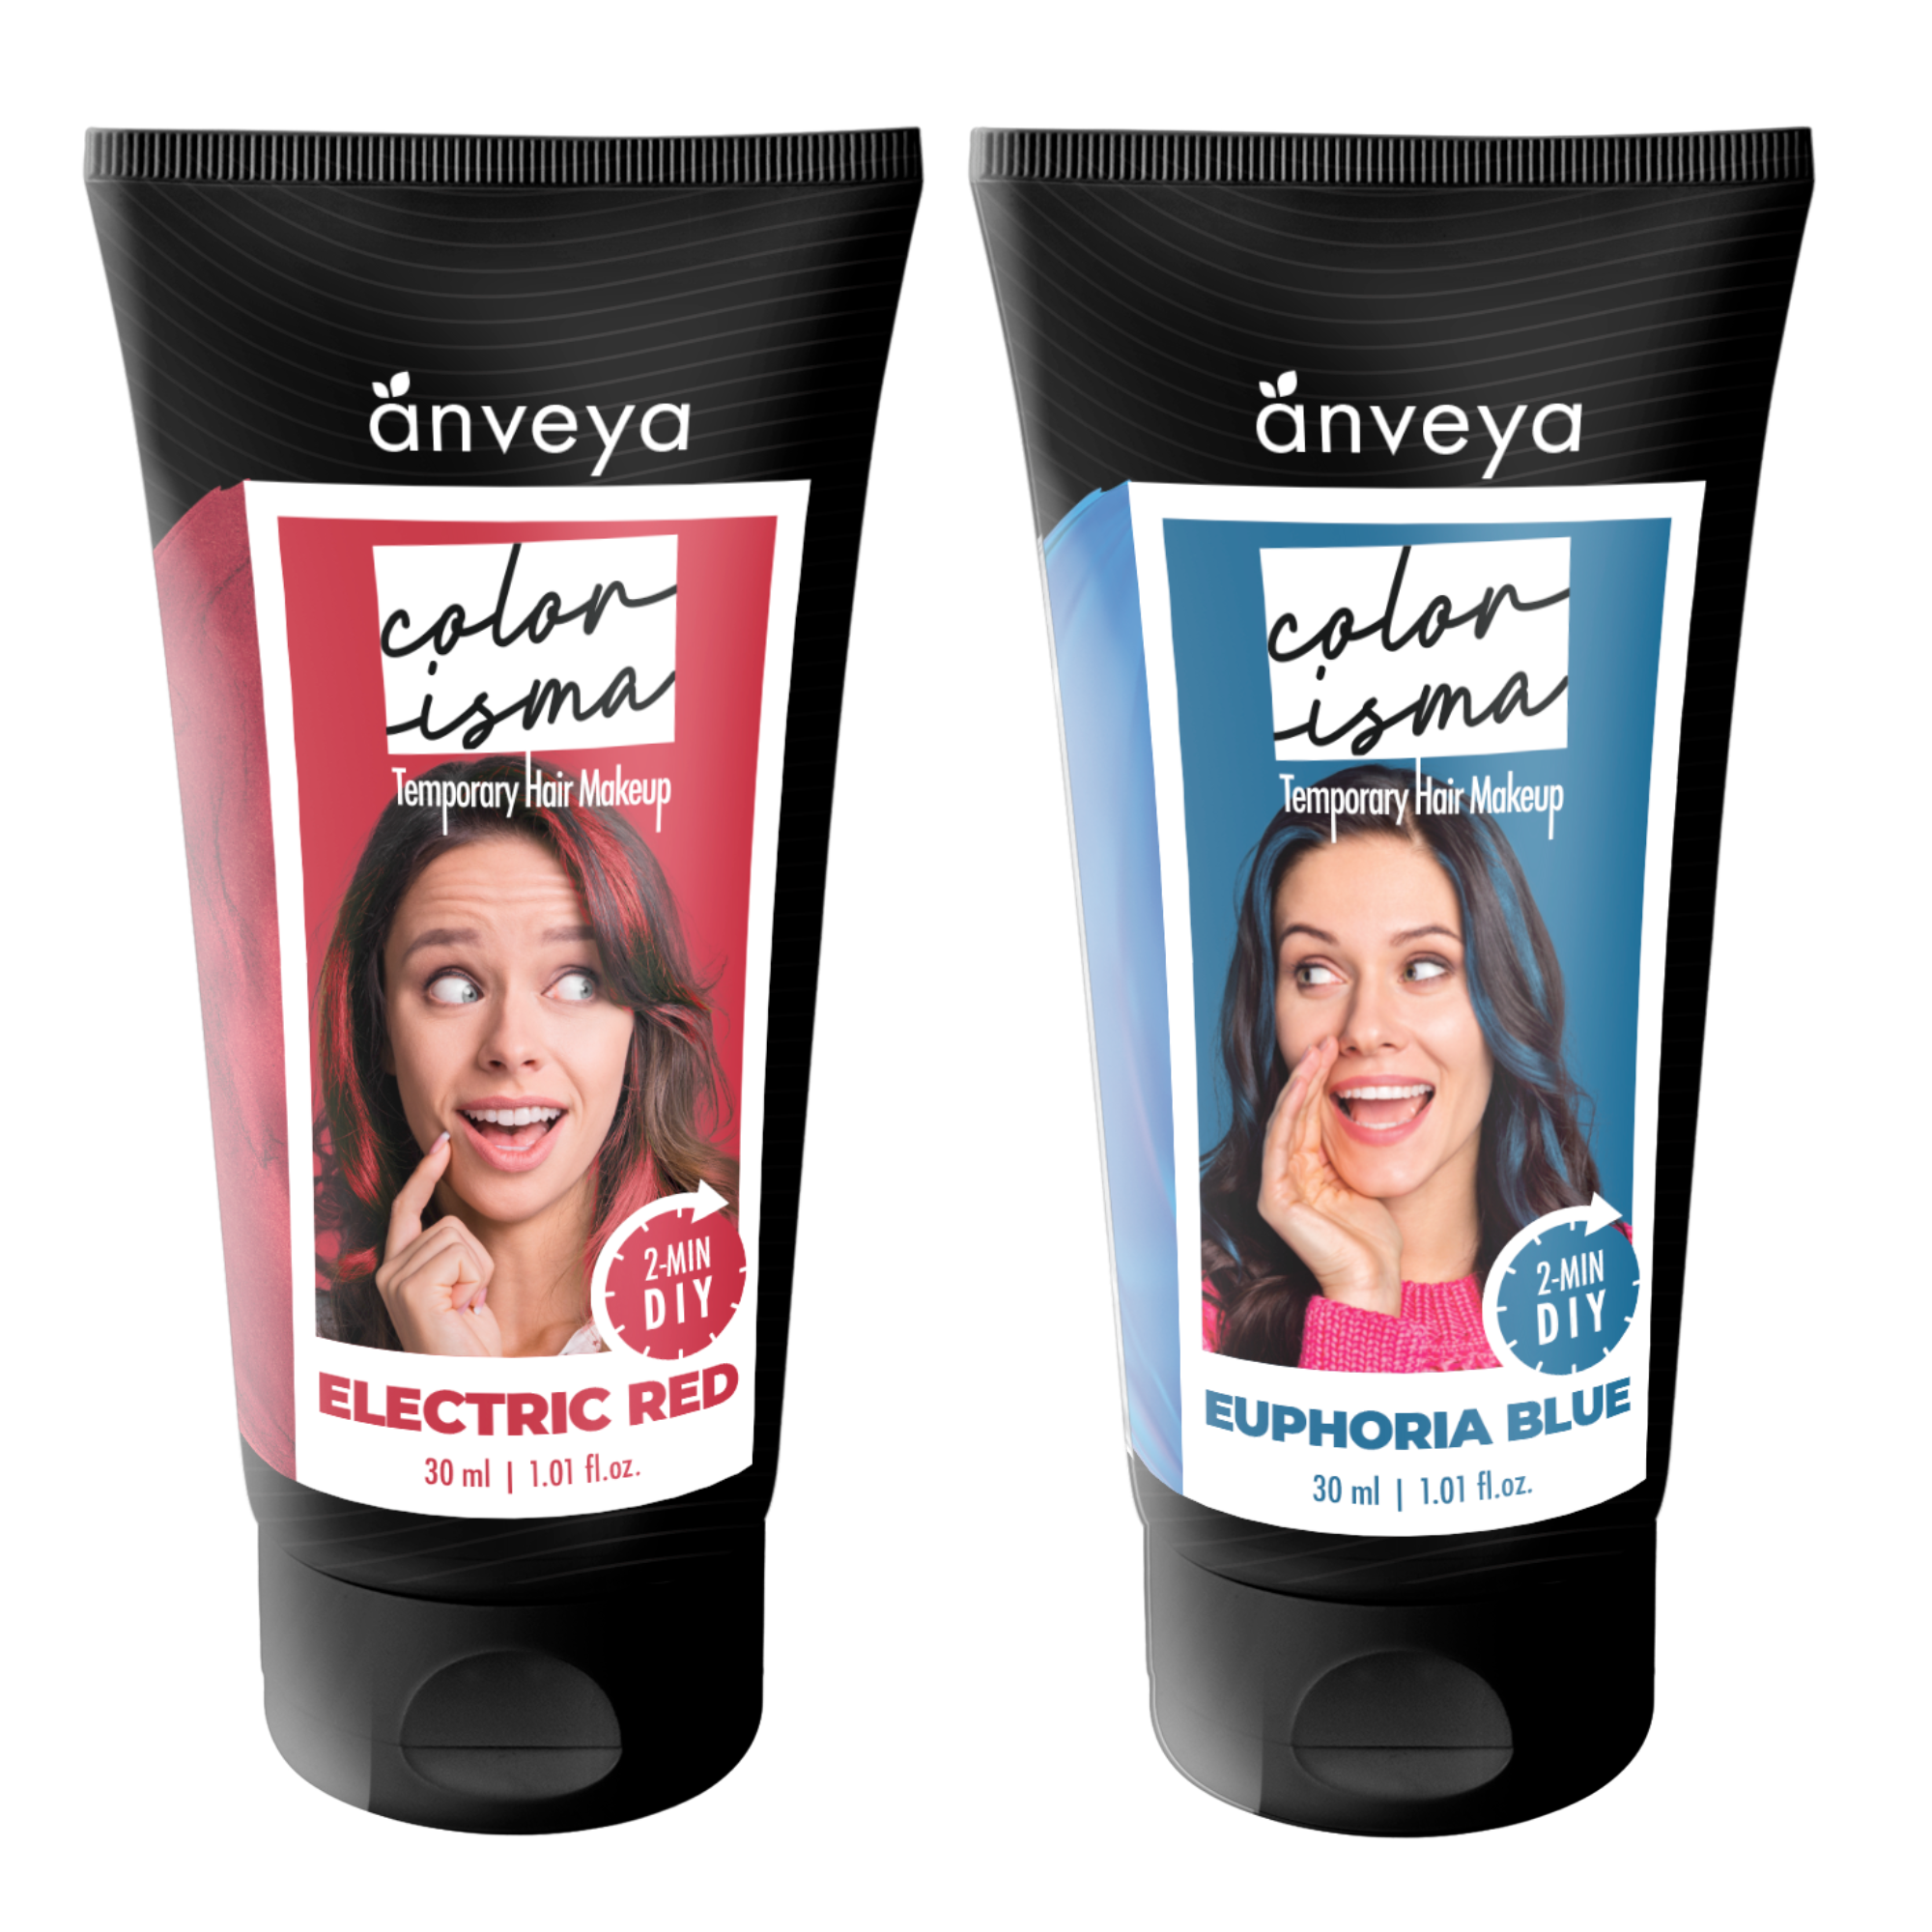 Anveya Colorisma Electric Red and Euphoria Blue Temporary Hair Color, 30ml each